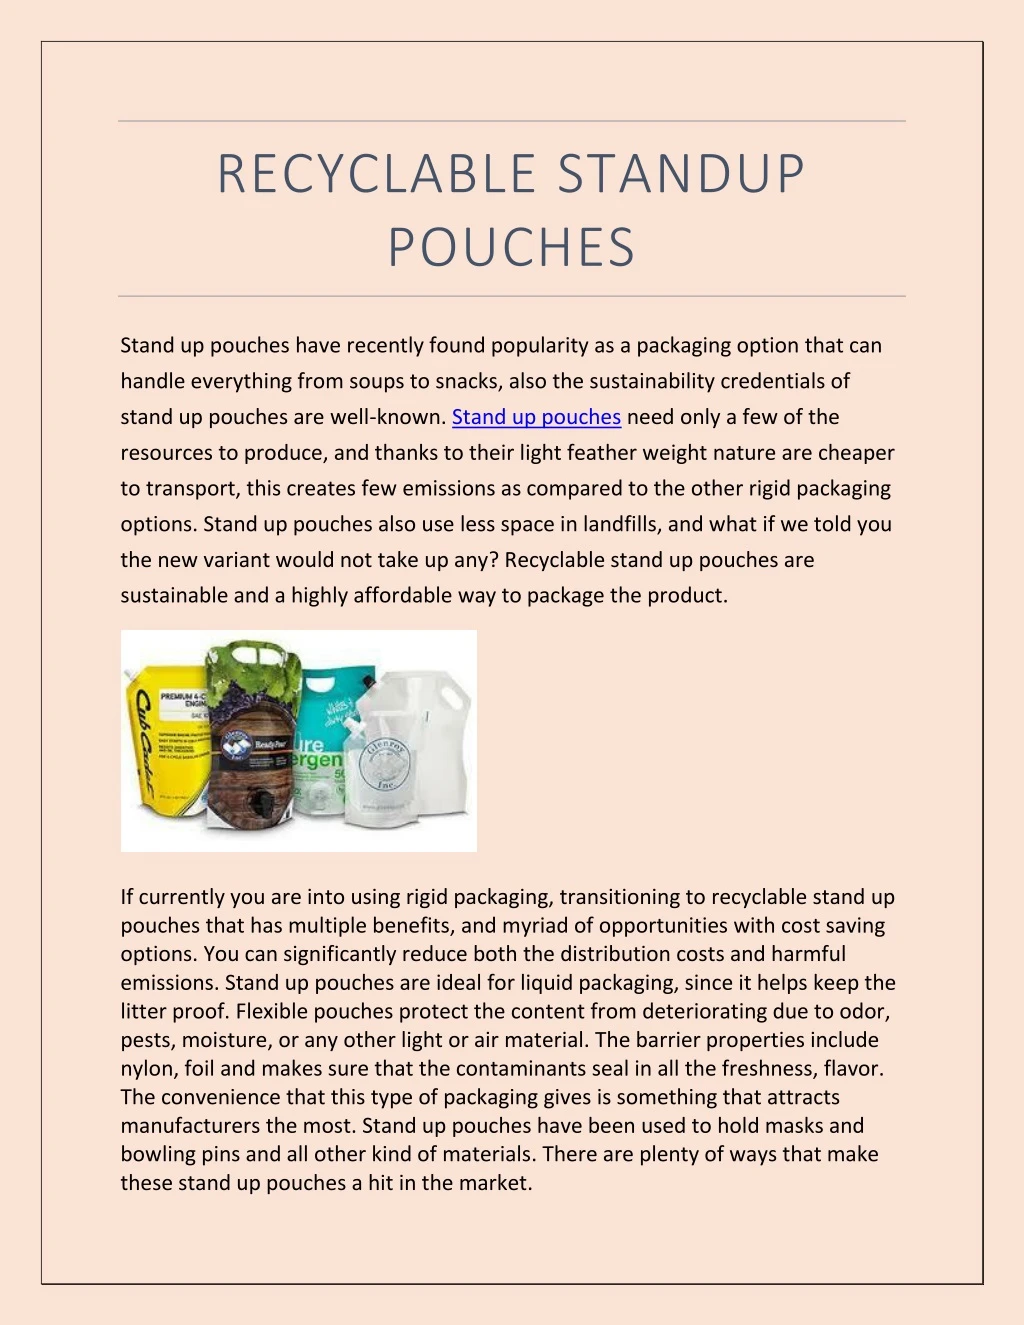 recyclable standup pouches